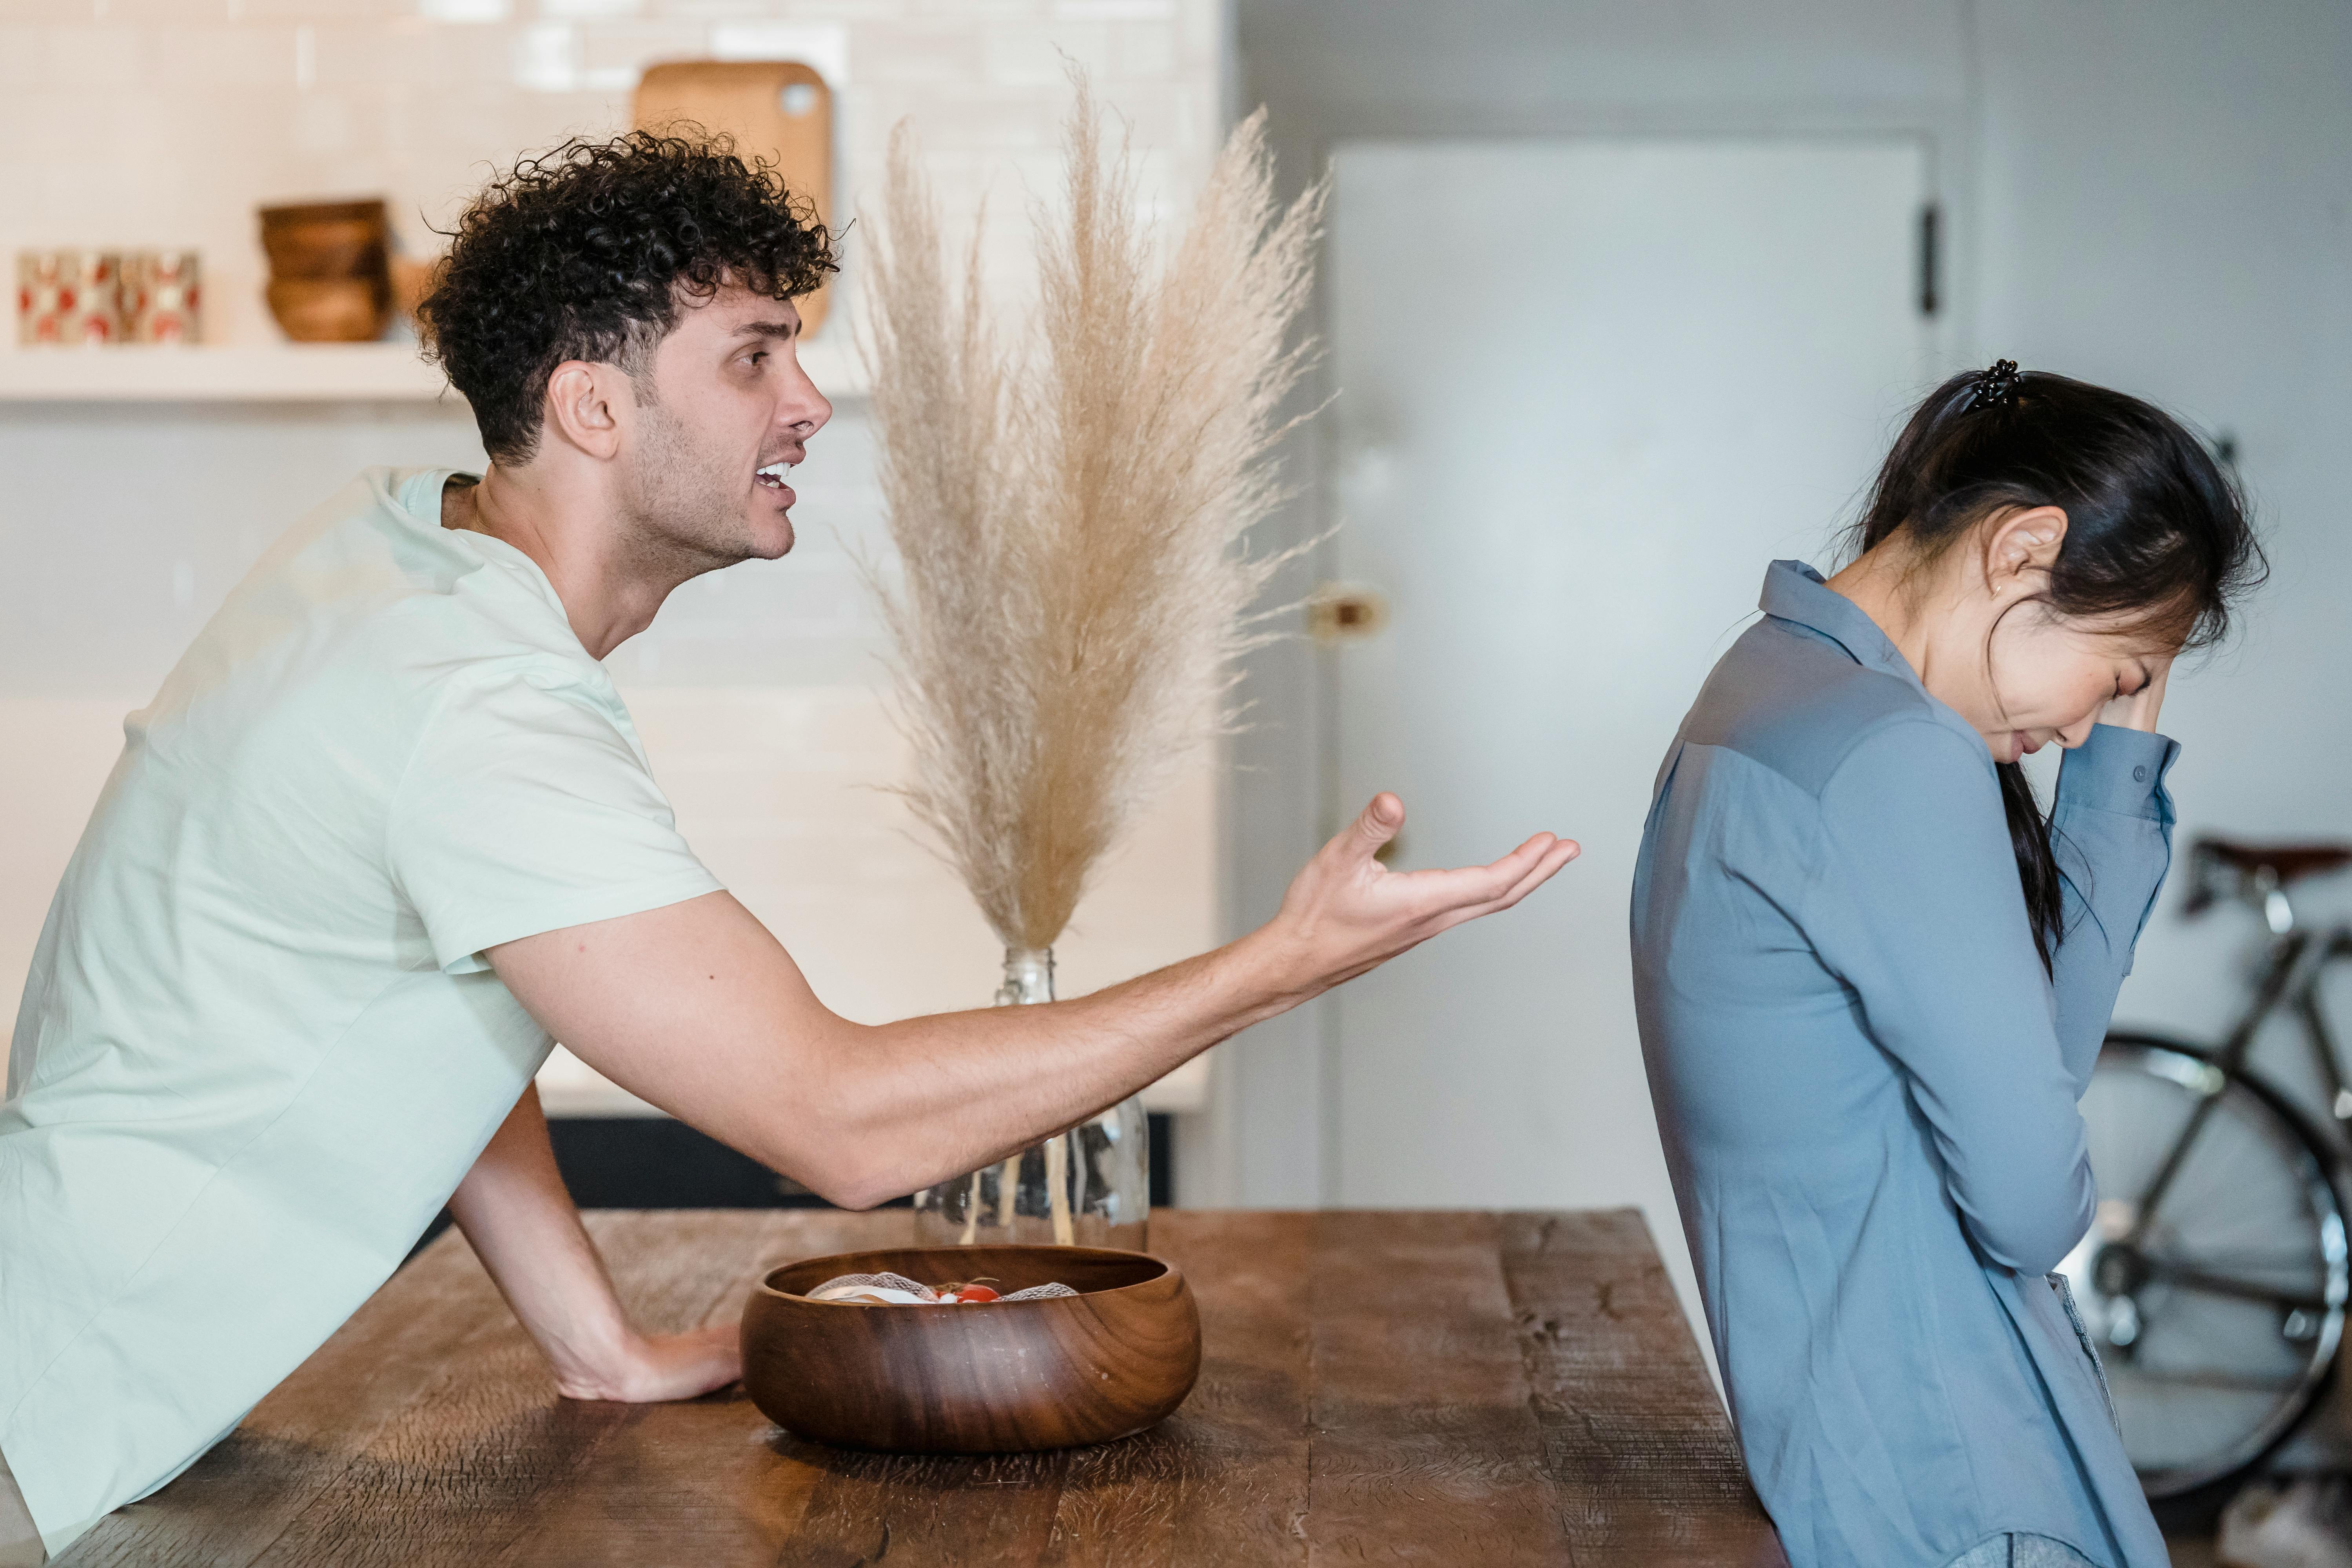 A couple arguing in the kitchen | Source: Pexels